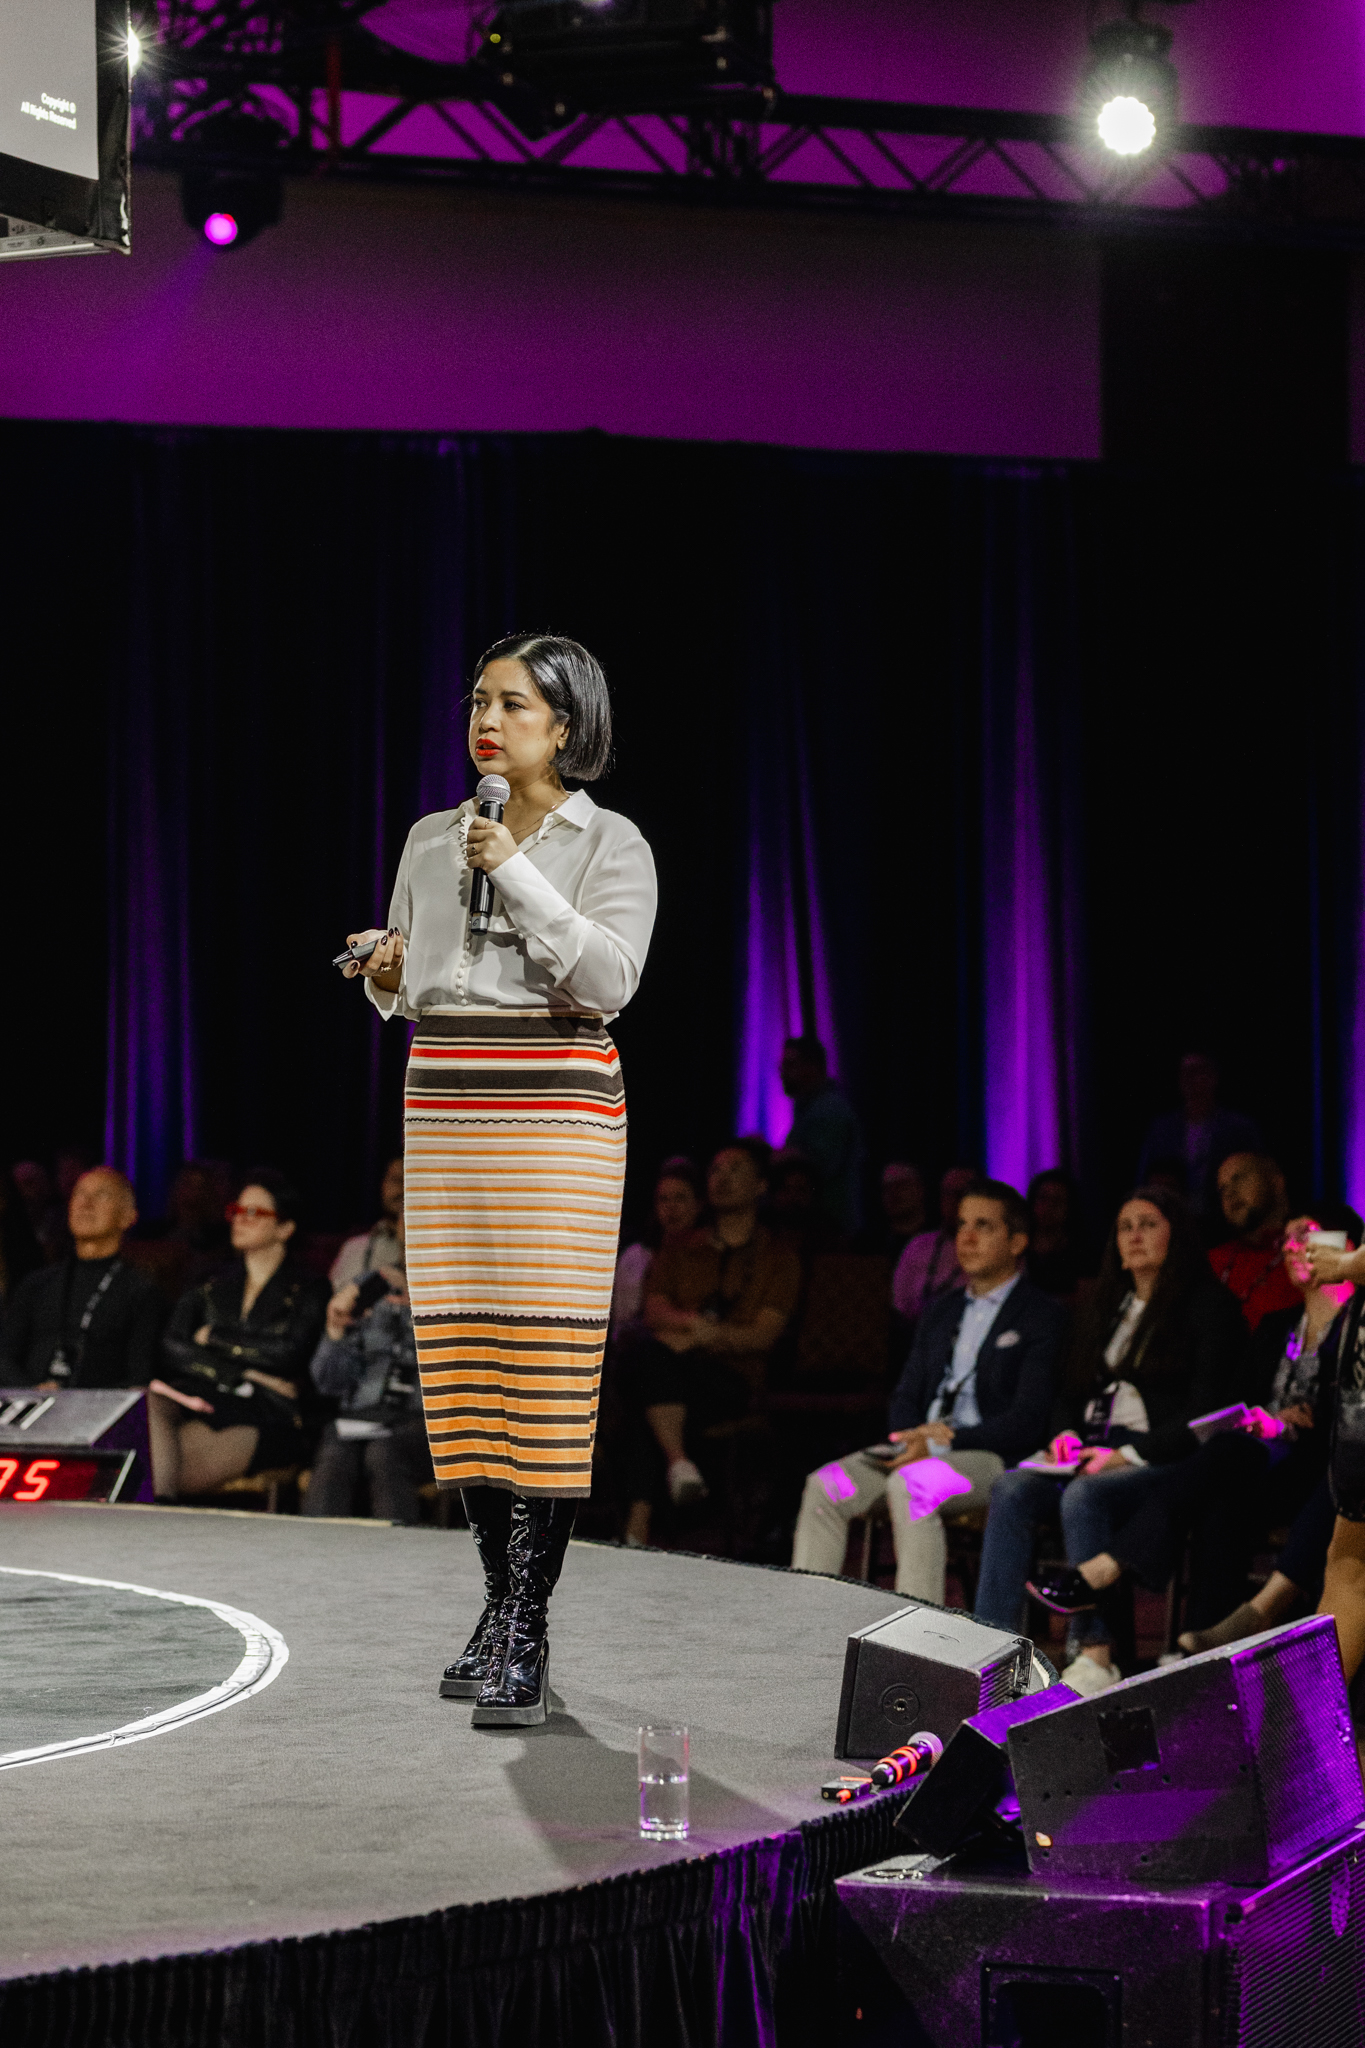 A woman delivering a speech on stage at an event, captured by event photography.